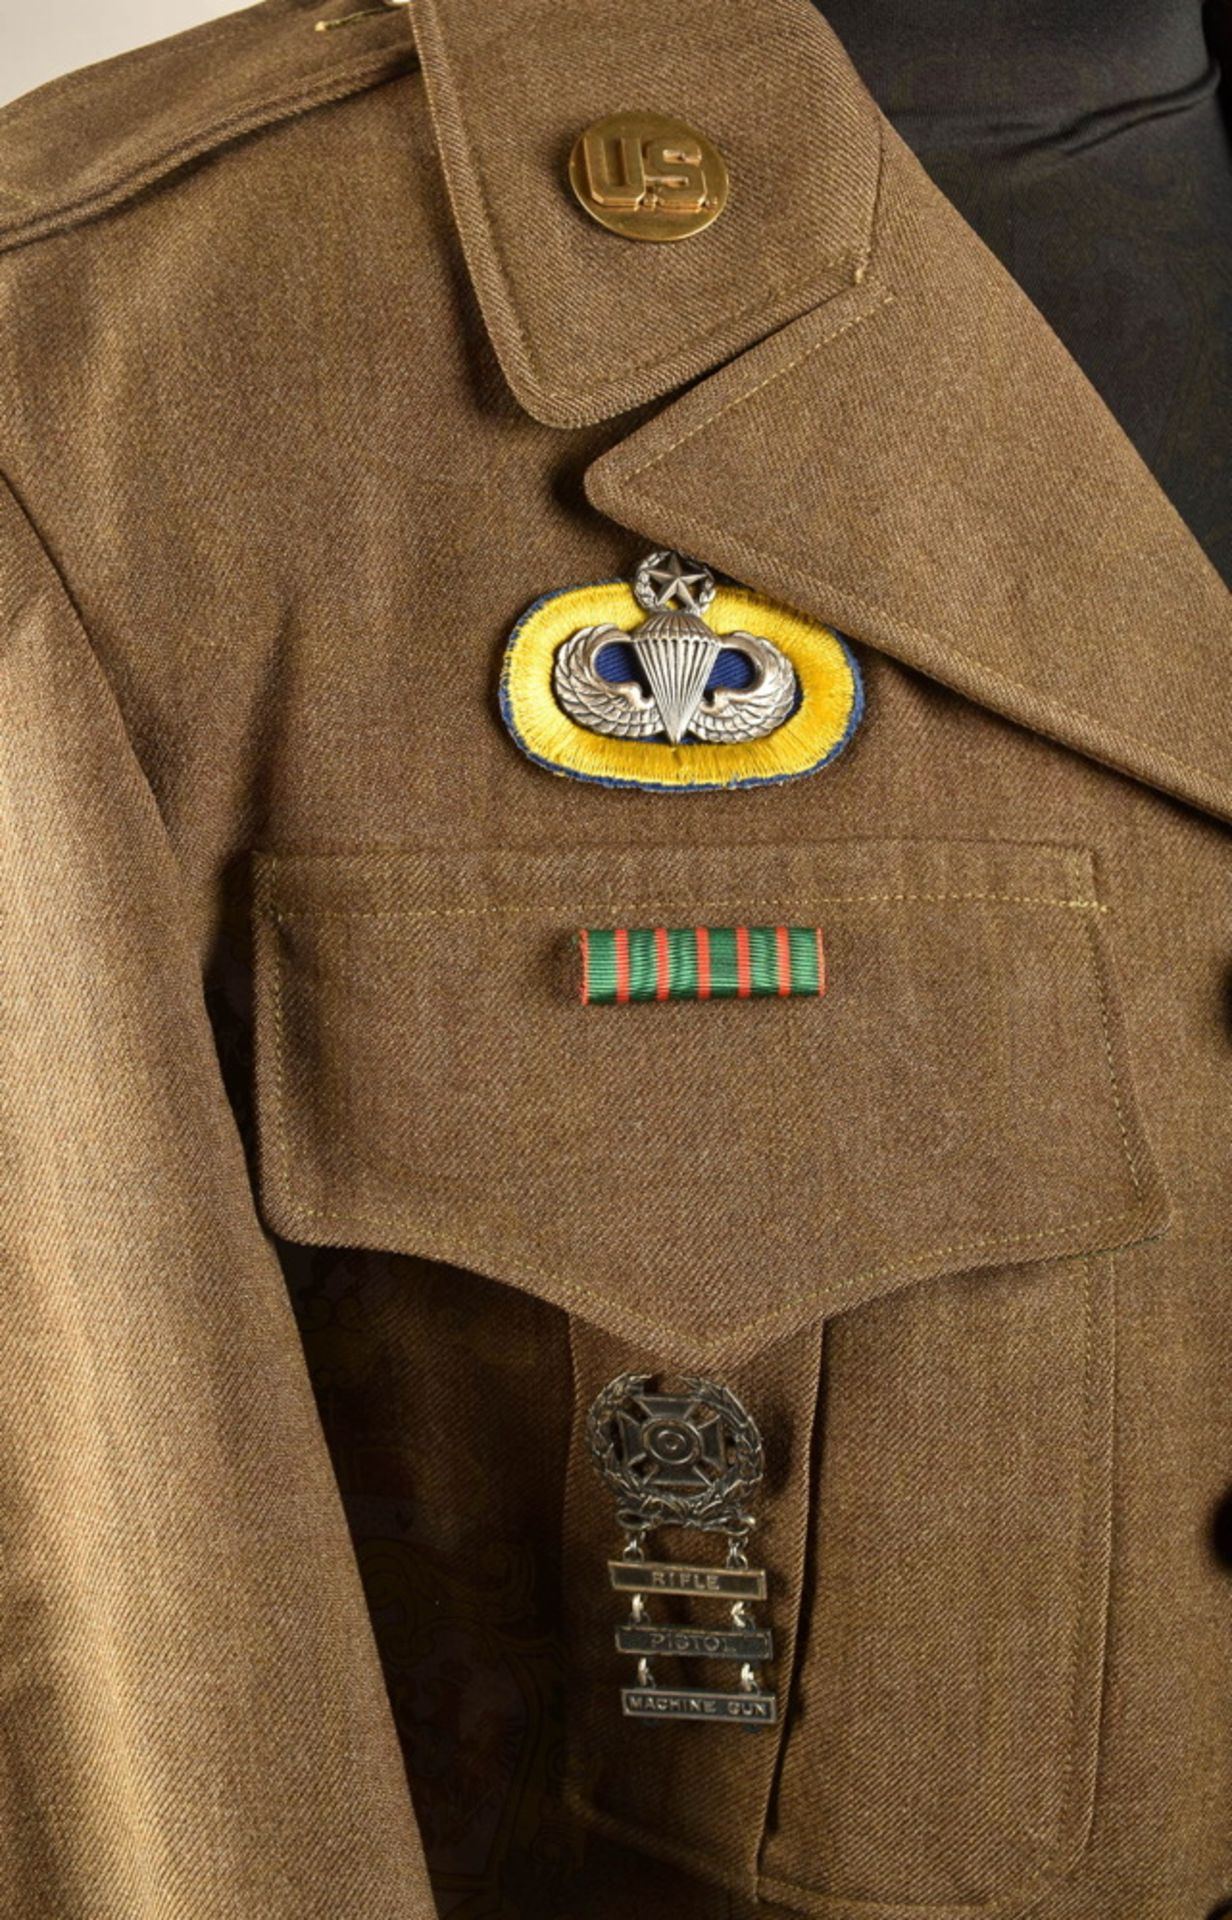 Uniform of the 101st Airborne Division - Image 4 of 6